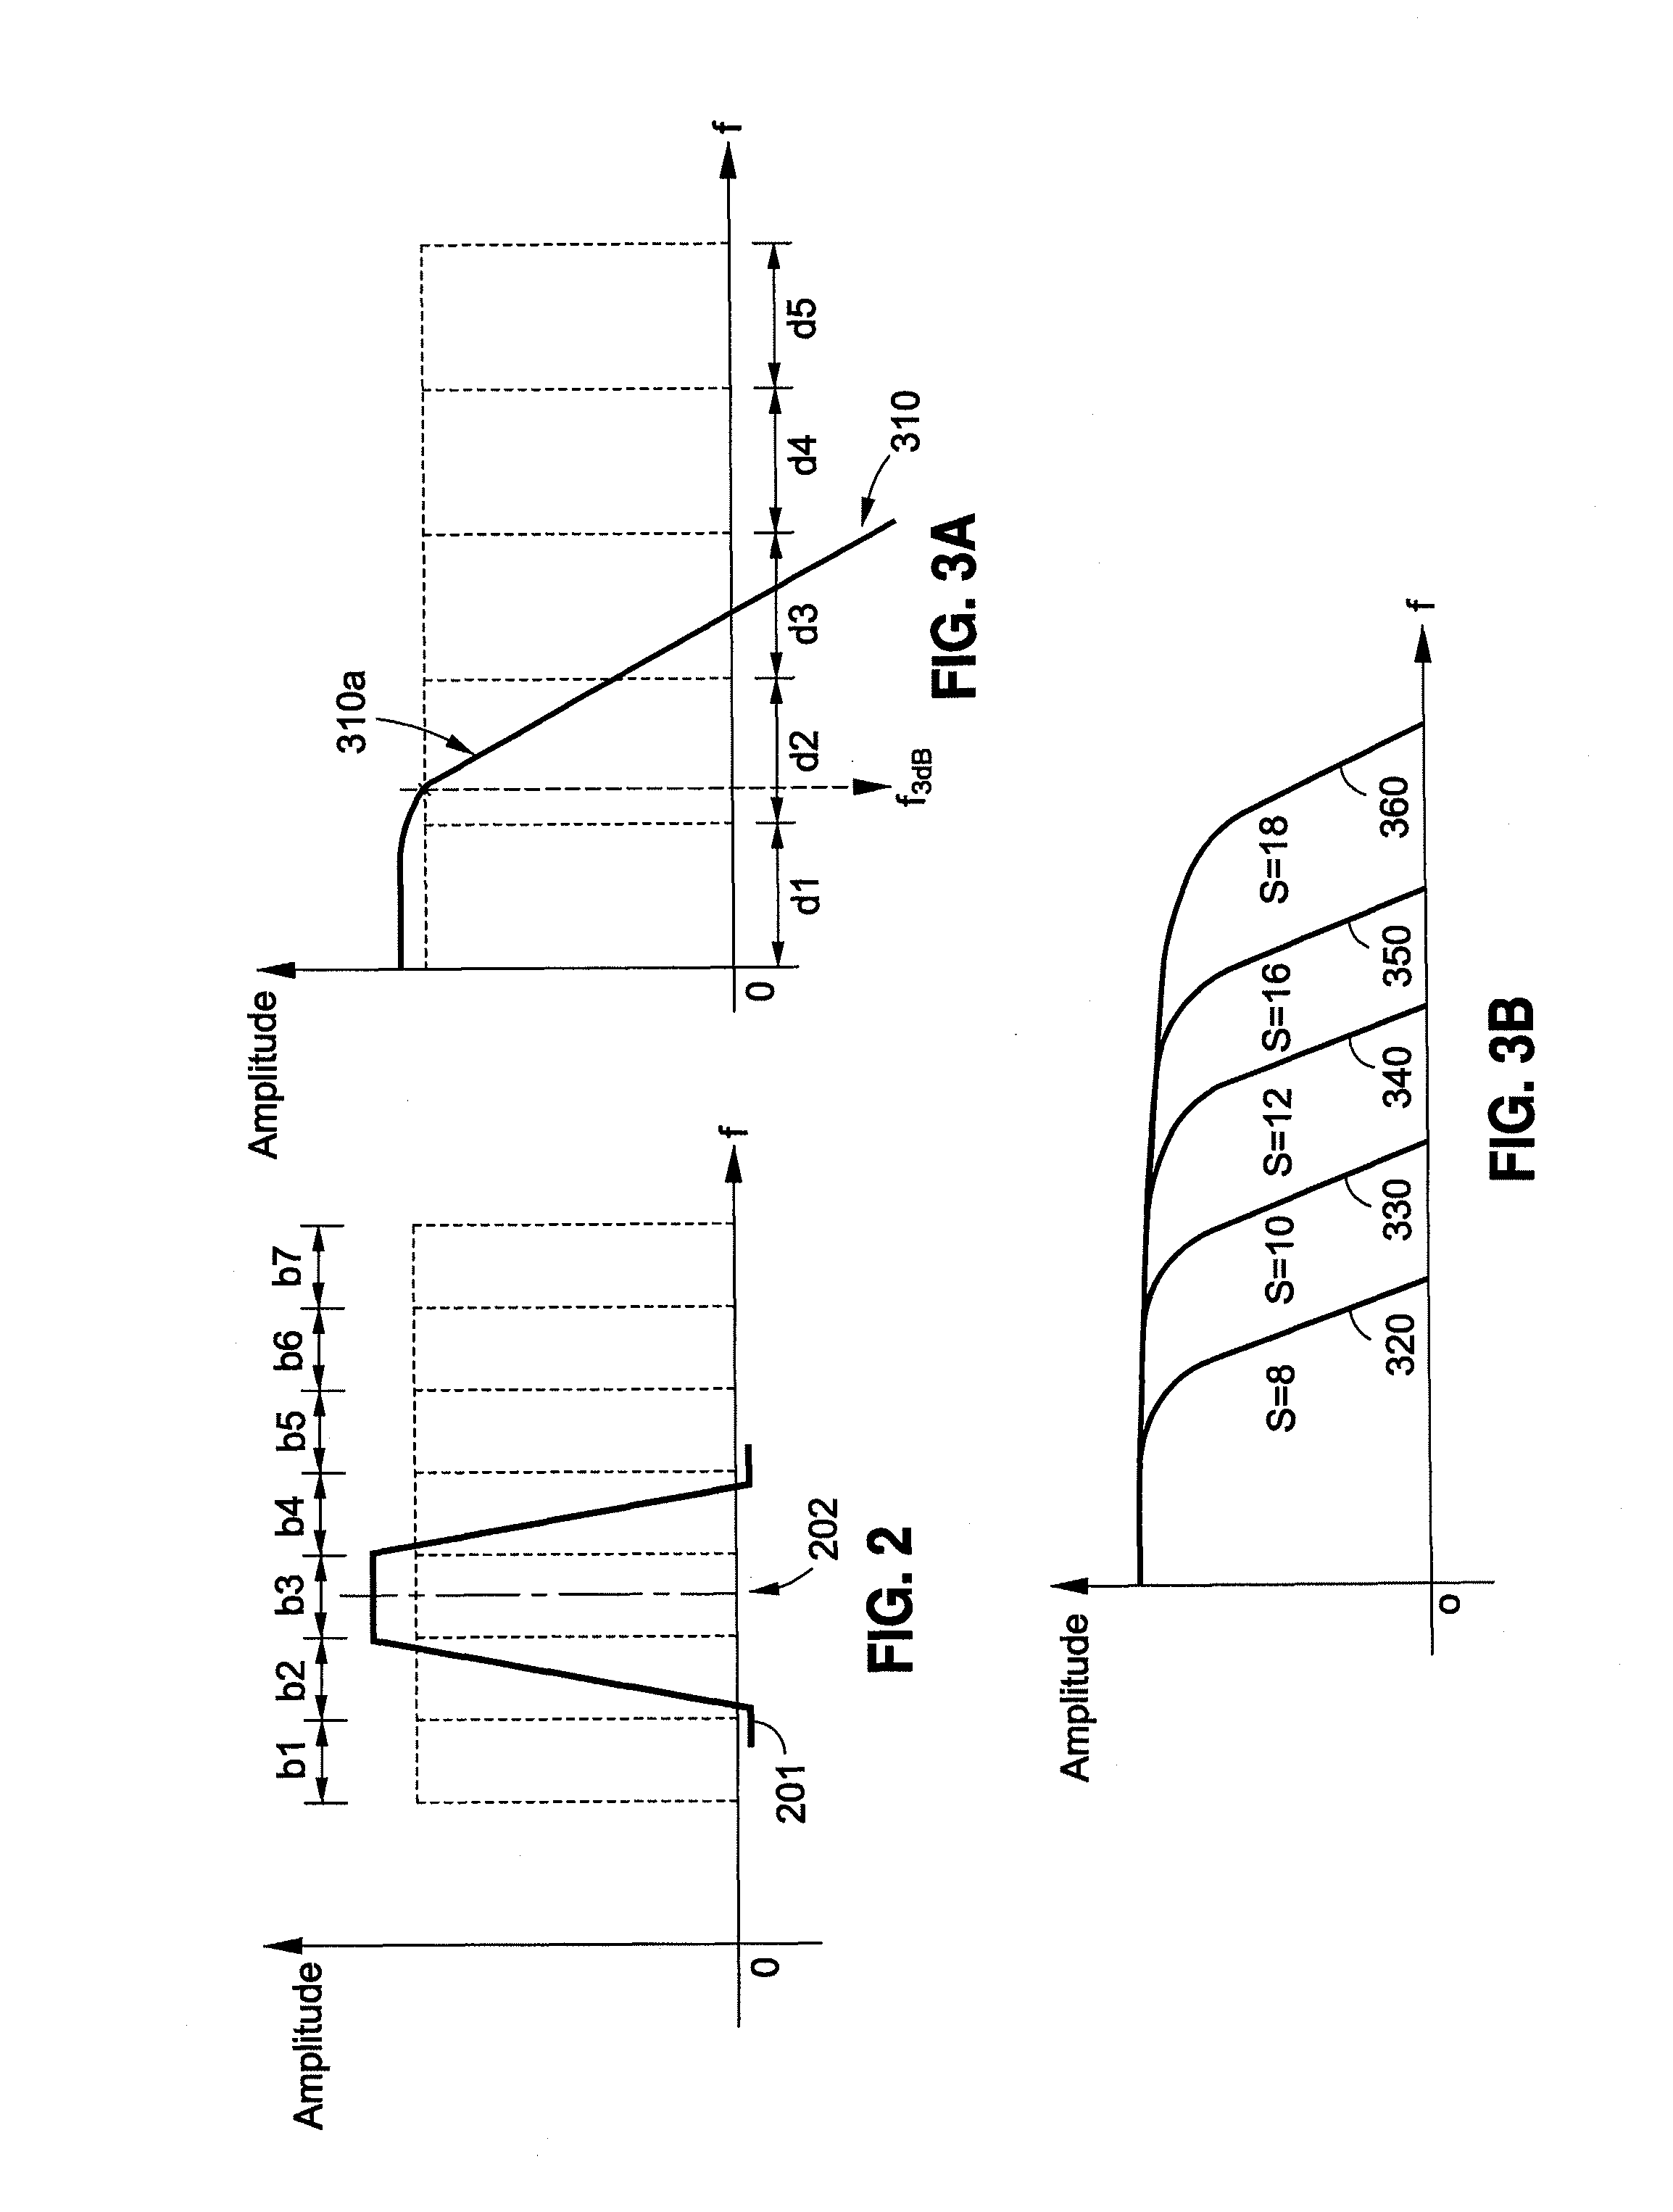 Channelization filter communication systems and methods therefor